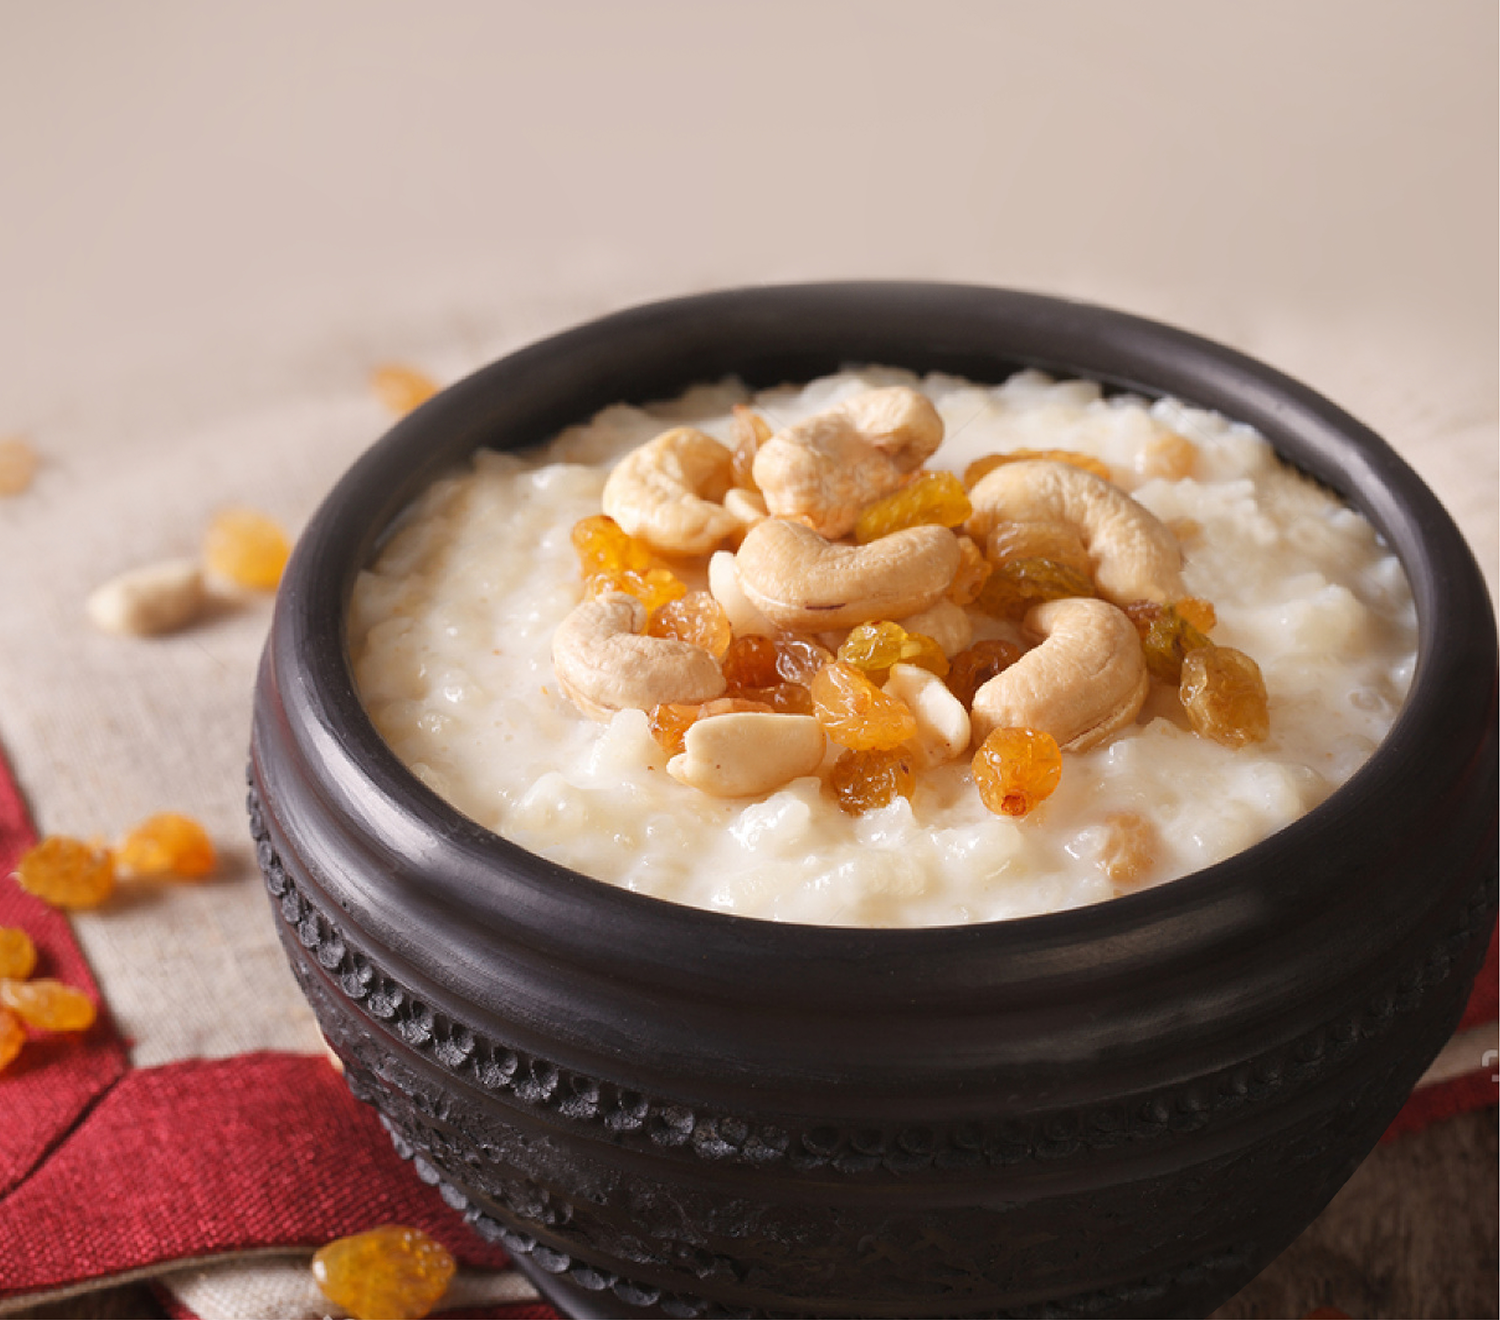 Quality Food Products - CREAMY RICE PUDDING